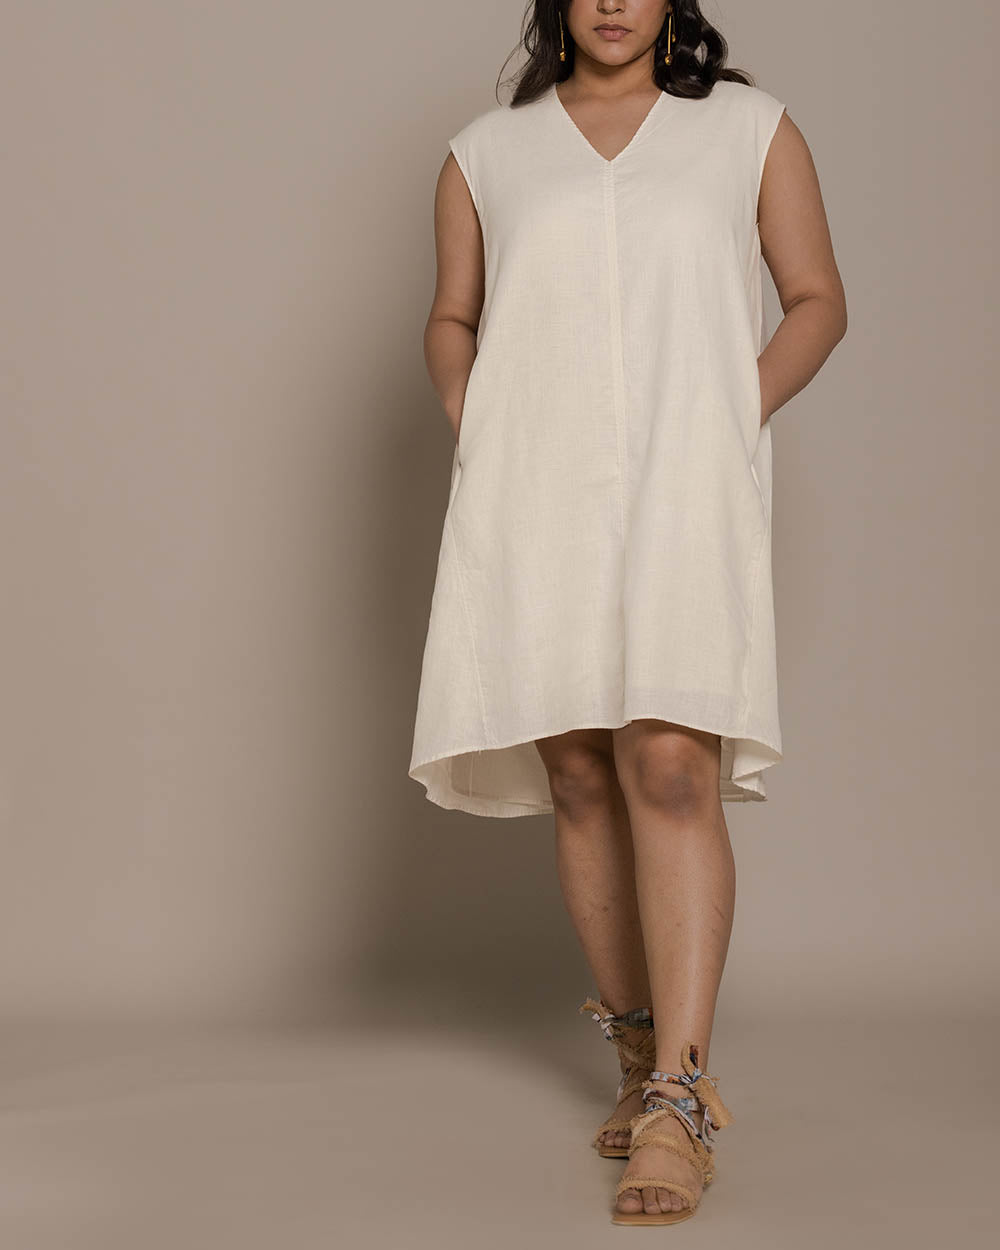 The Musical Dusk Dress - Shell Off White at Kamakhyaa by Reistor. This item is Best Selling, Casual Wear, Hemp, Mini Dresses, Natural, Sleeveless Dresses, Solids, White, Womenswear